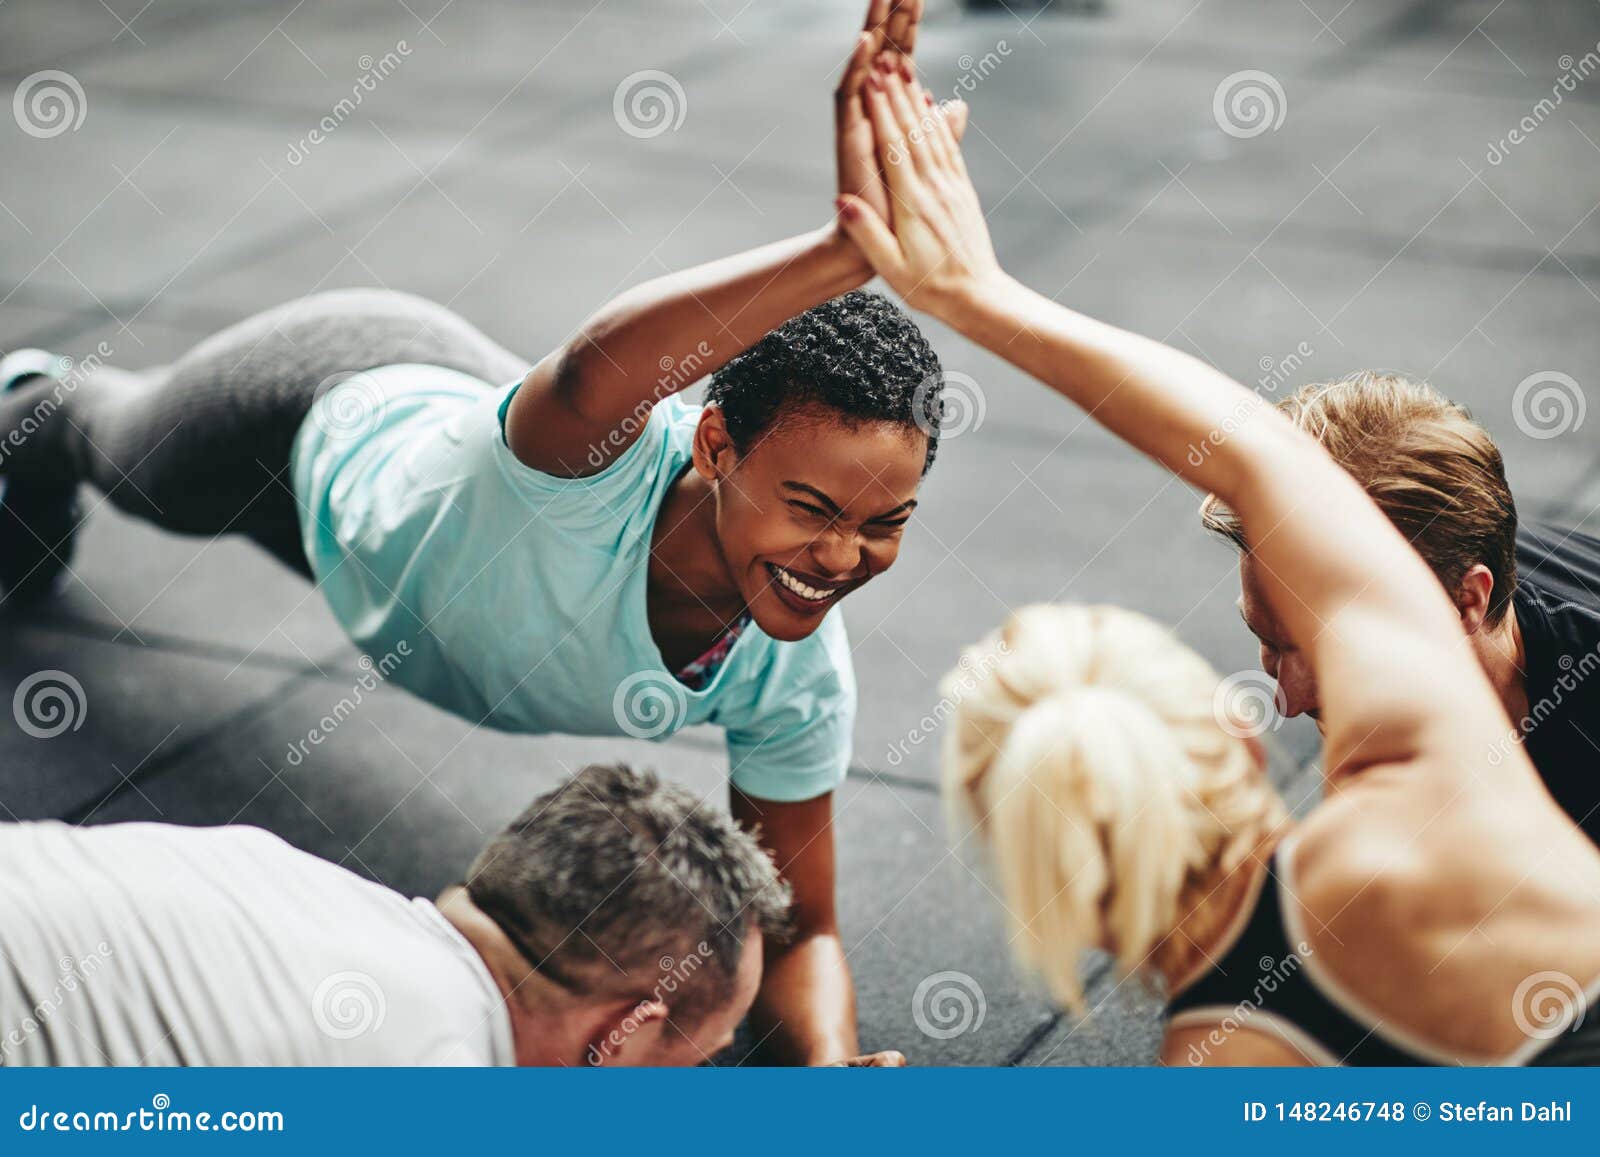 laughing women high fiving while planking in a gym class